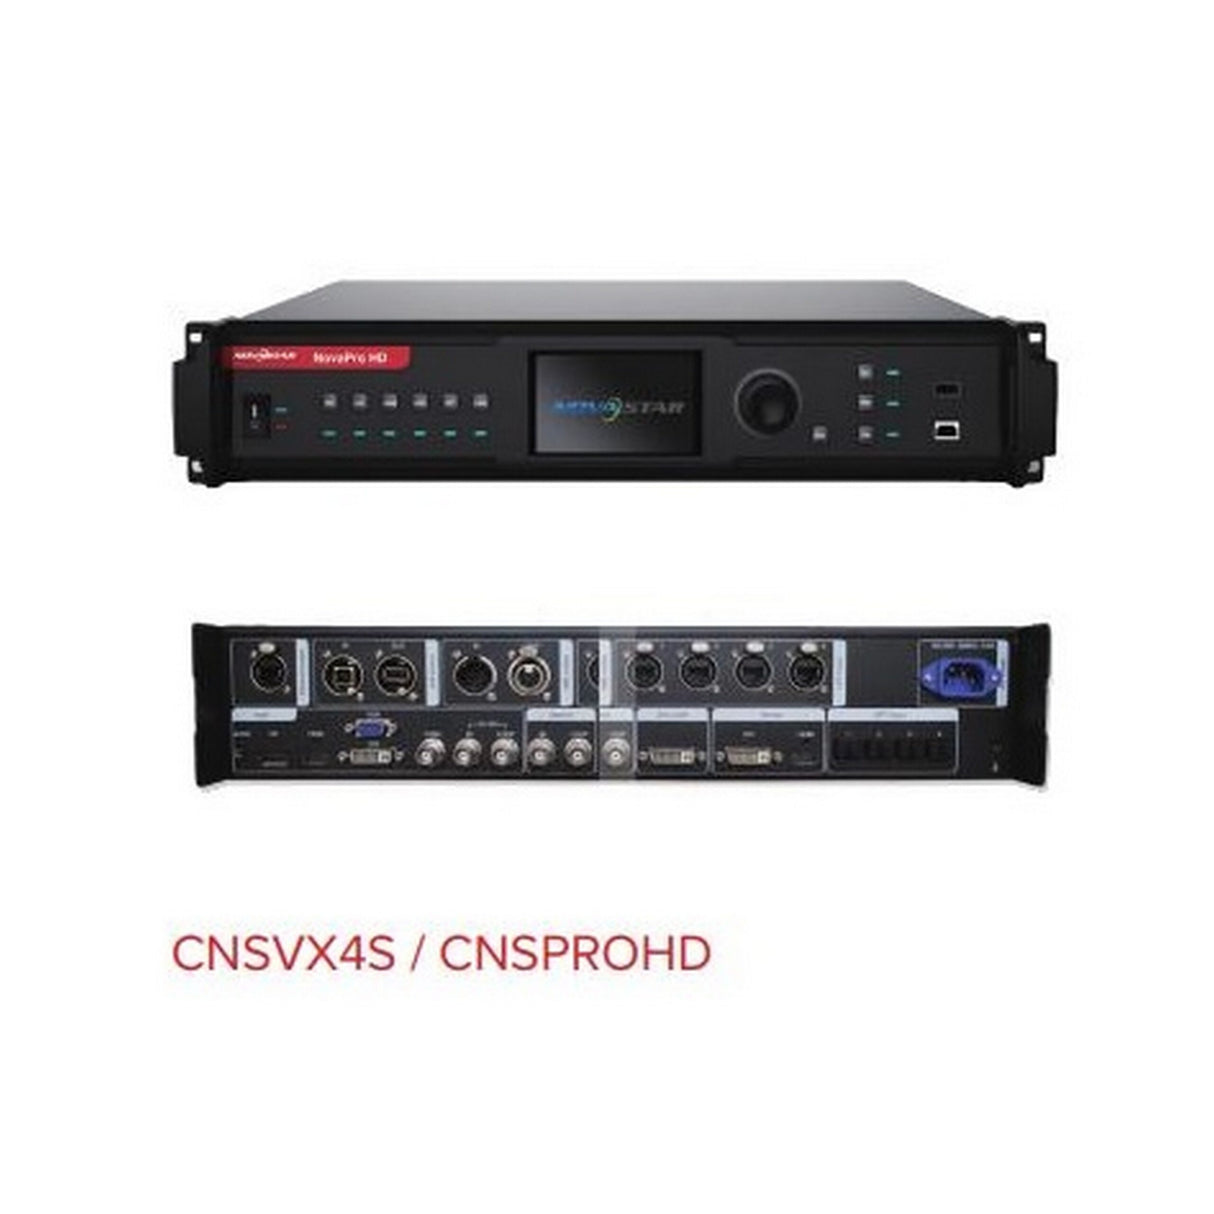 Neoti CNSPROHD Switching/Scaling Controller